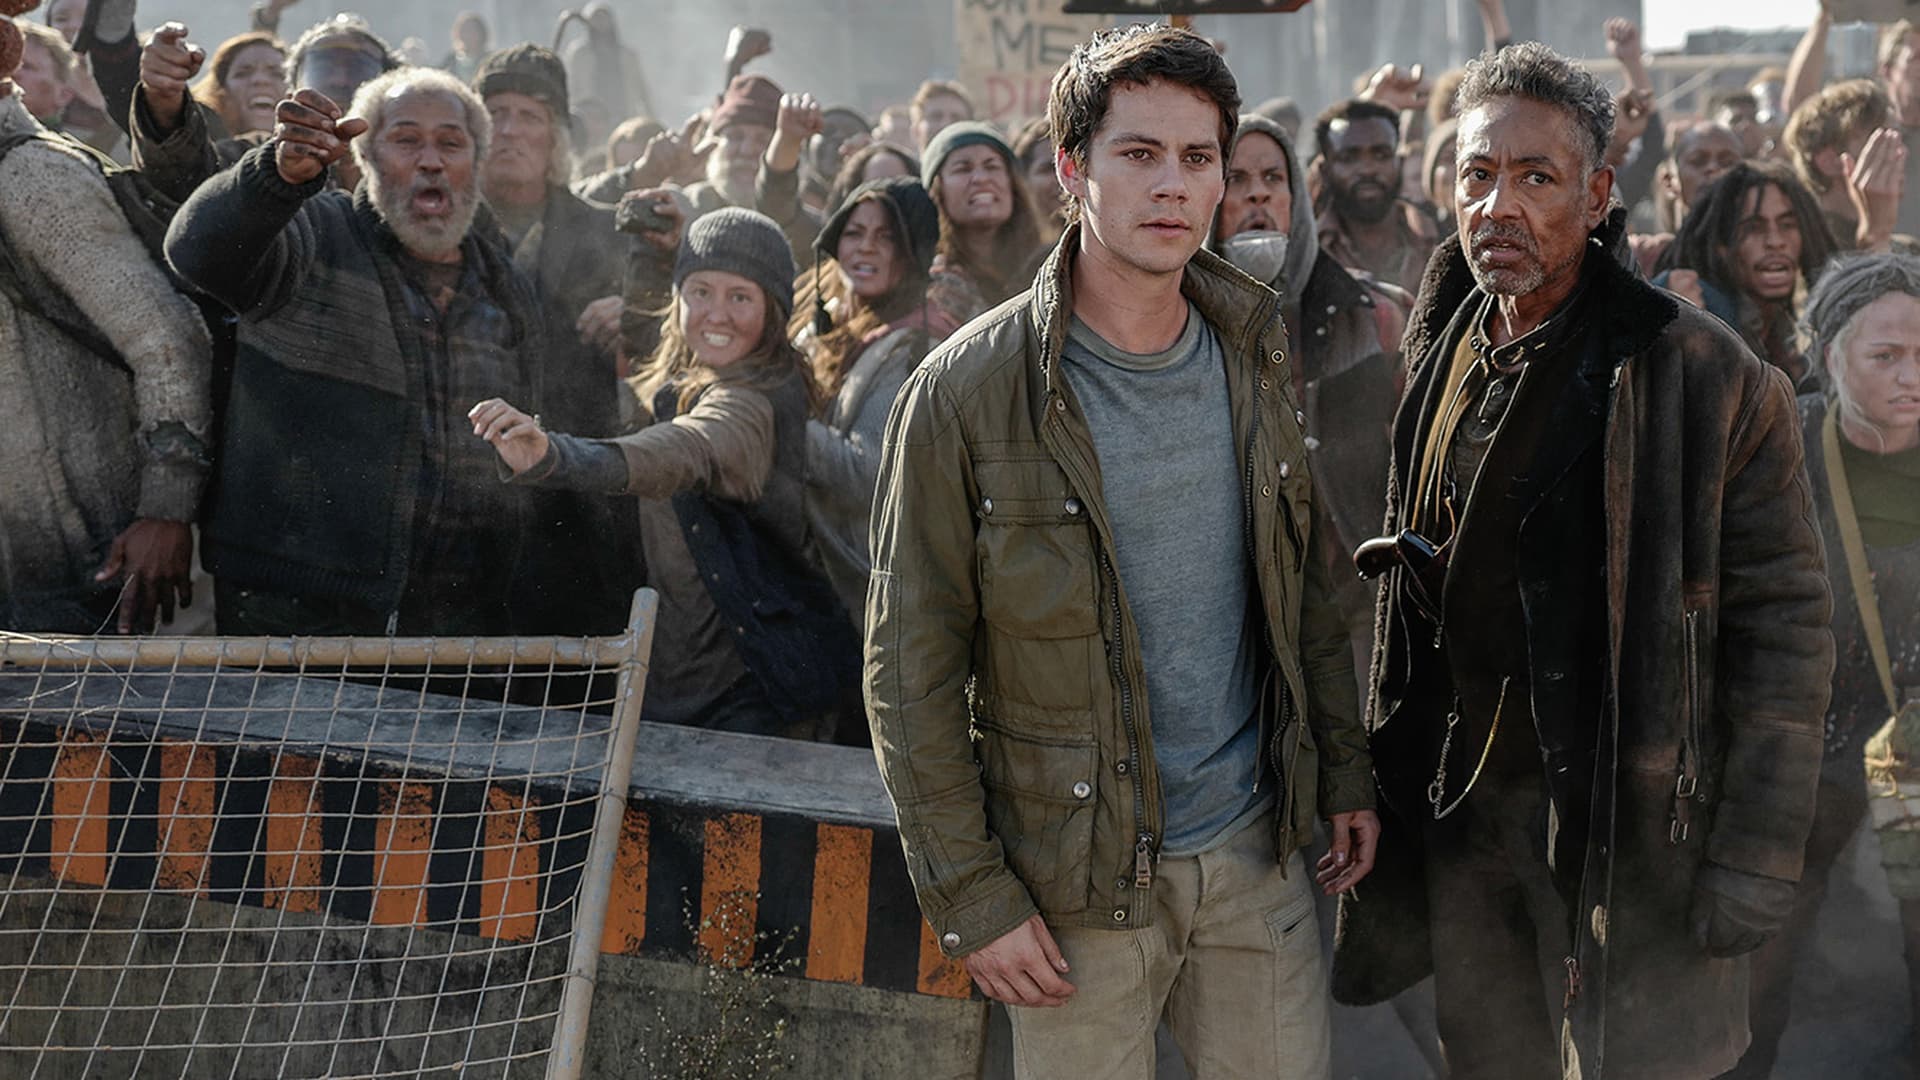 Watch Maze Runner: The Death Cure Streaming Online